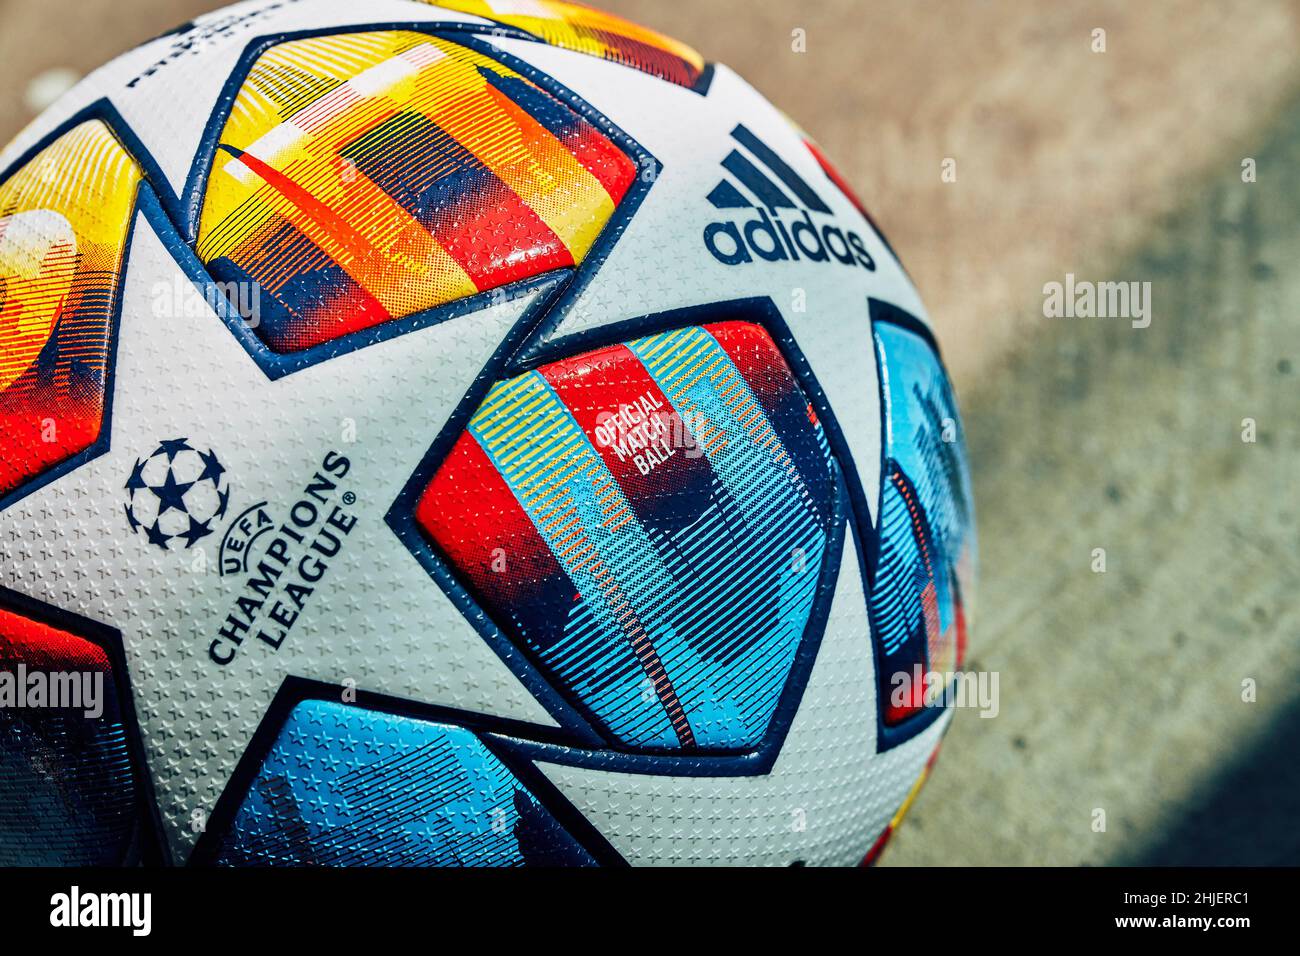 Football: Adidas Final, official match ball for the knockout stages and the  final in Paris of UEFA Champions League 2022 Stock Photo - Alamy